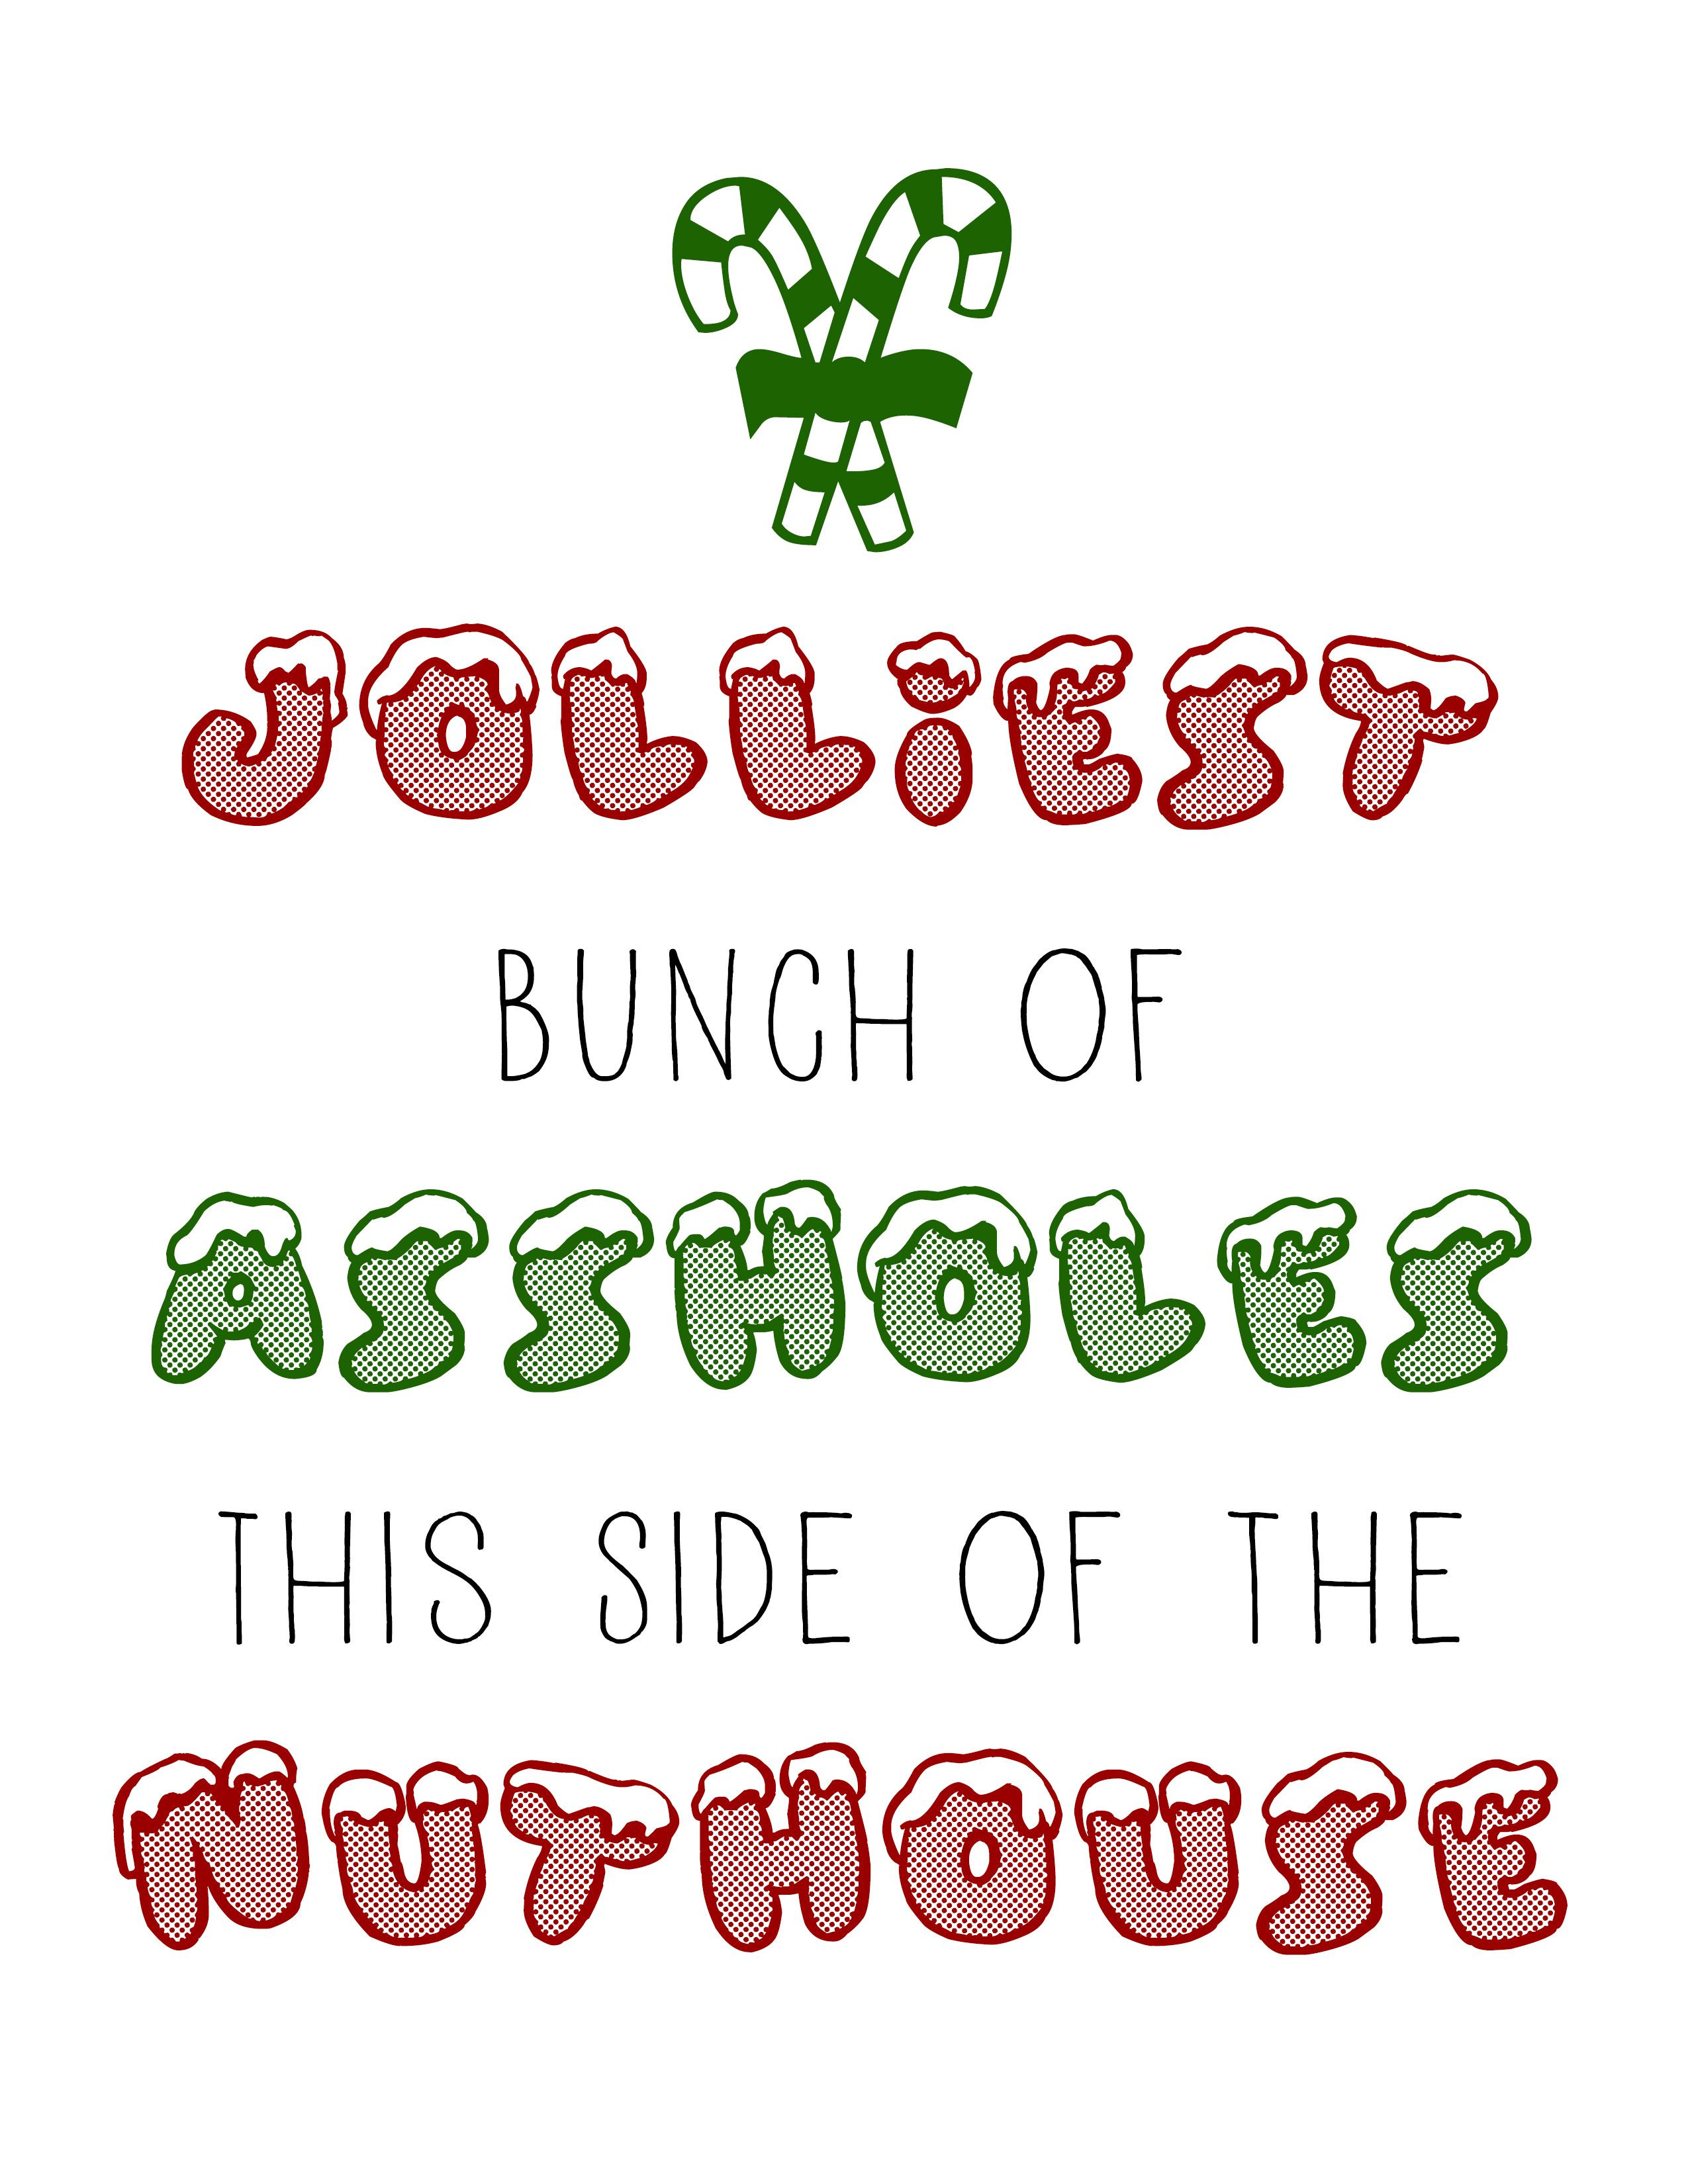 Jolliest Bunch Of Christmas Vacation Quote
 "Jolliest bunch of assholes this side of the nuthouse